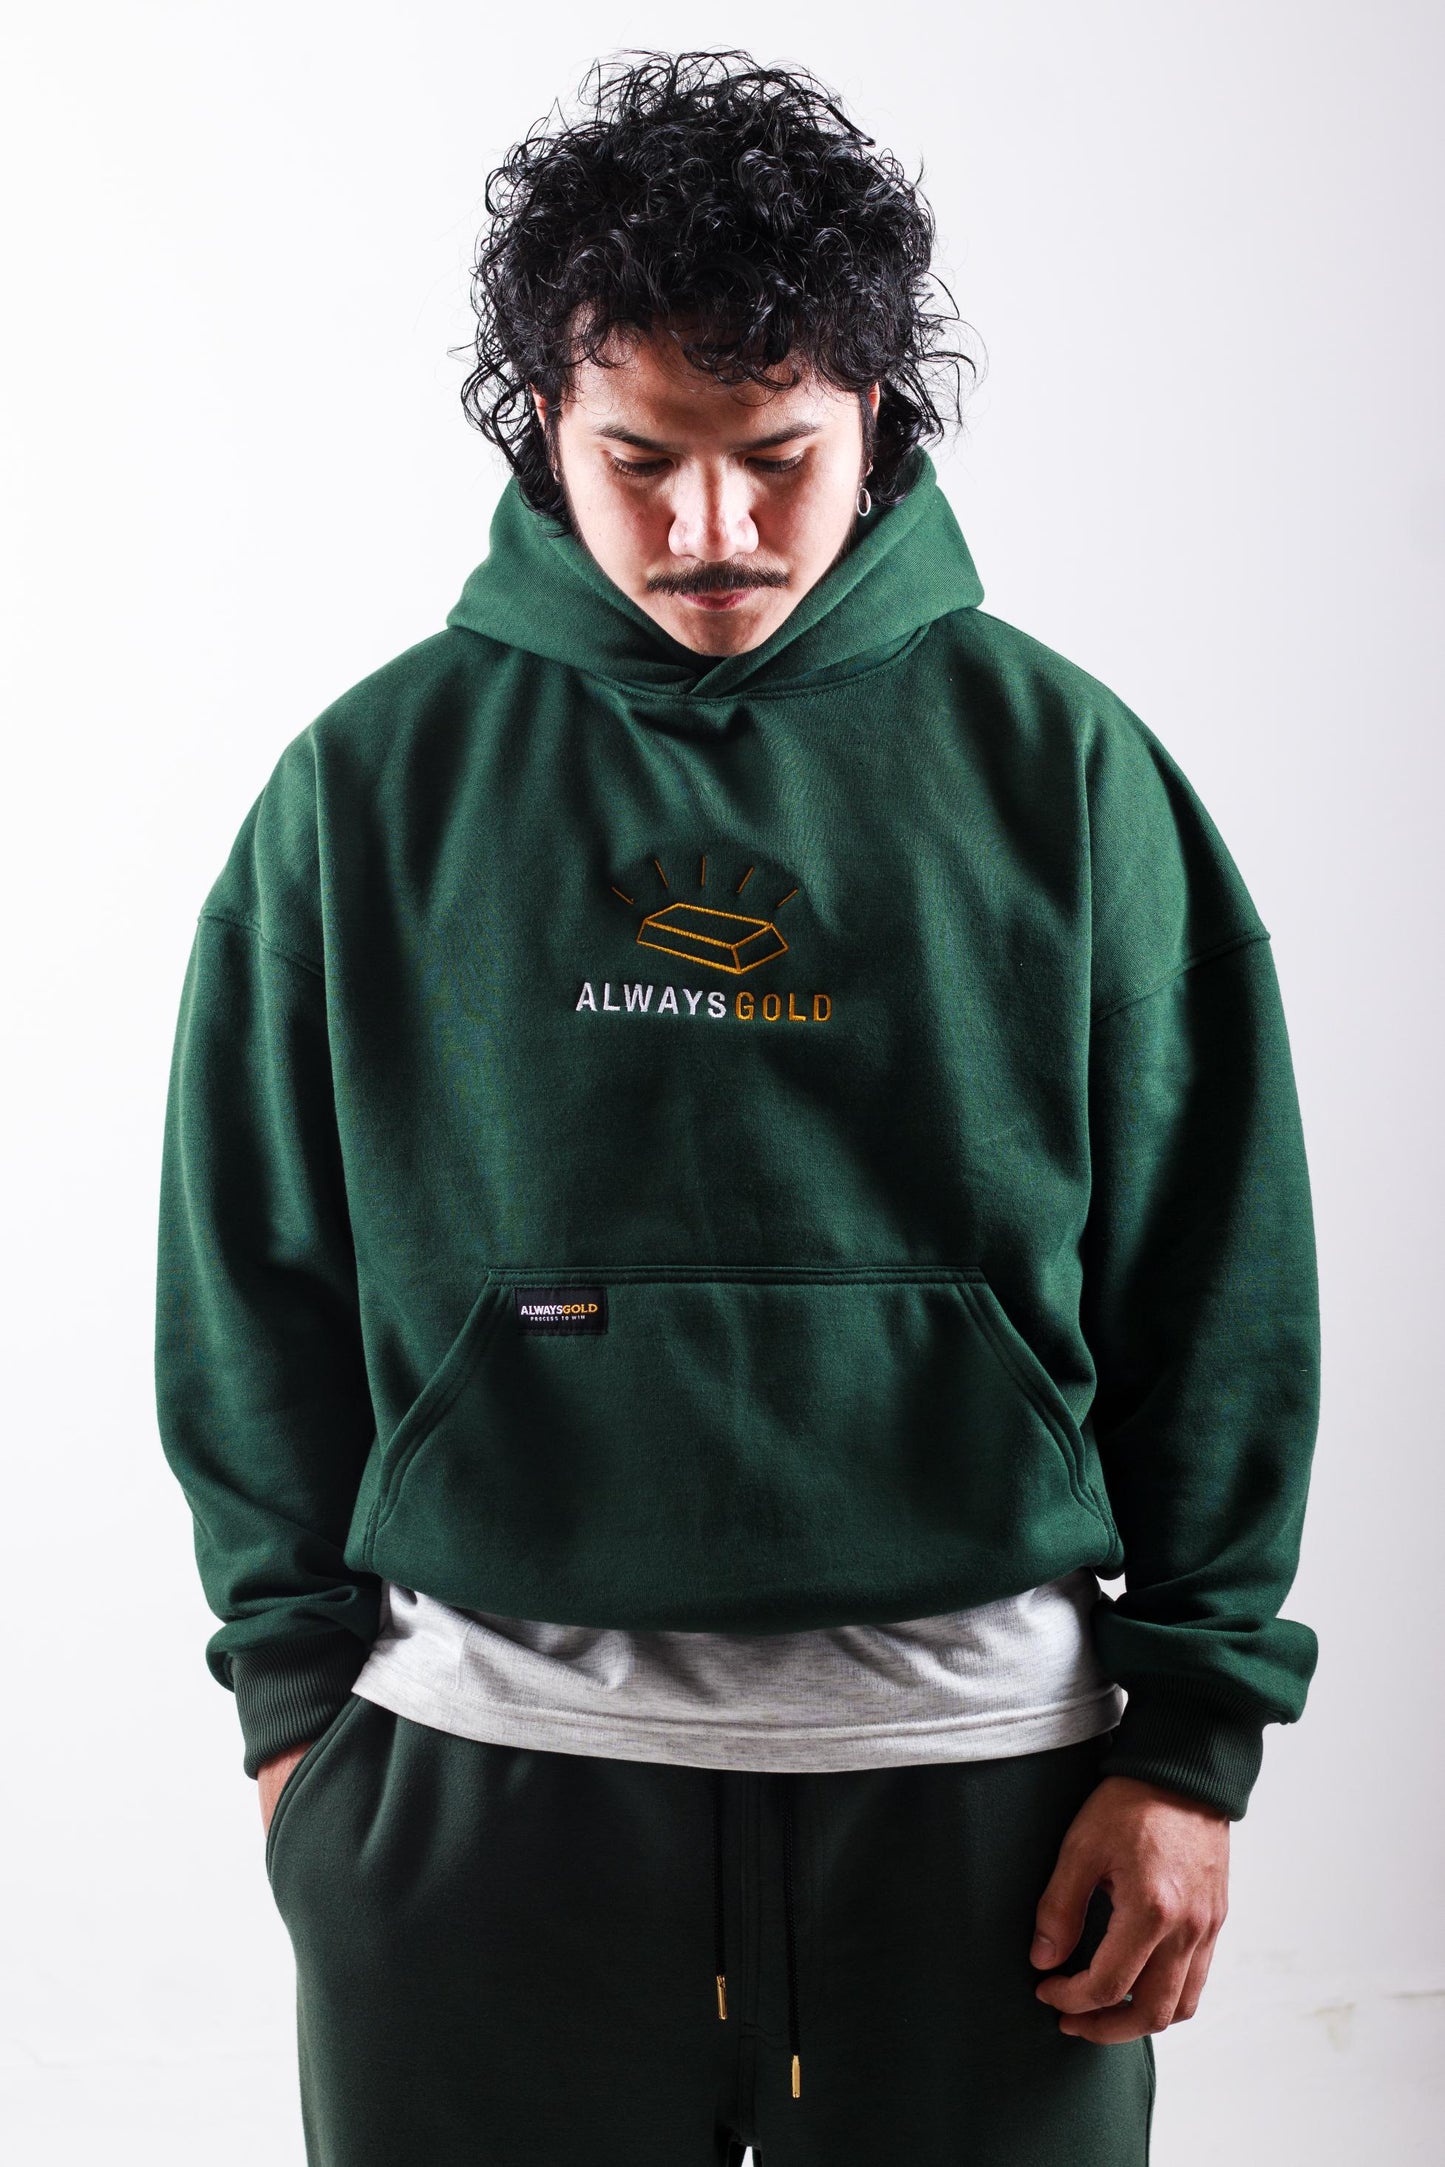 GOLD EMBRO HOODIE IN ARMY GREEN